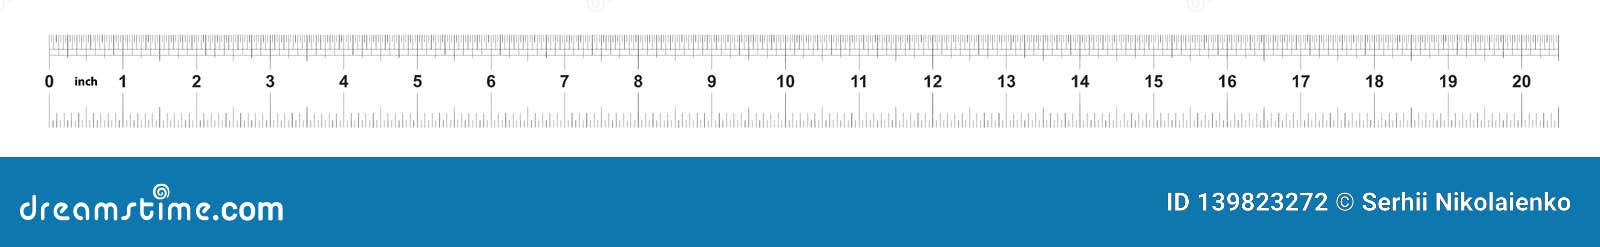 ruler 20 inches imperial ruler 20 inches metric precise